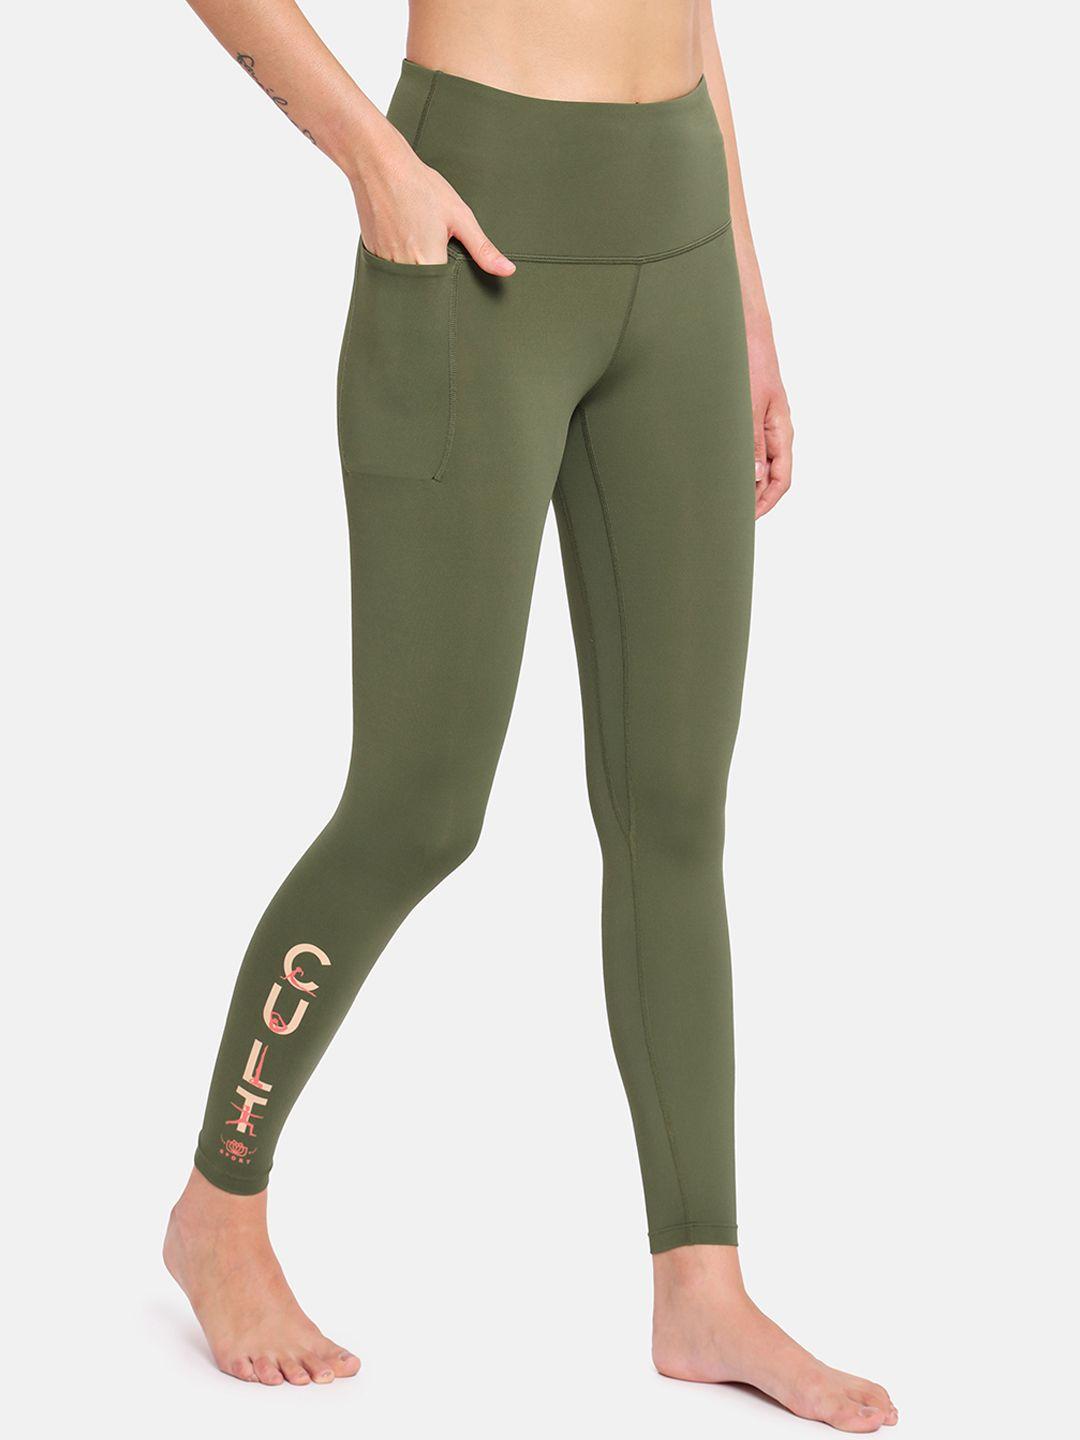 cultsport women logo printed yoga tights with side pocket